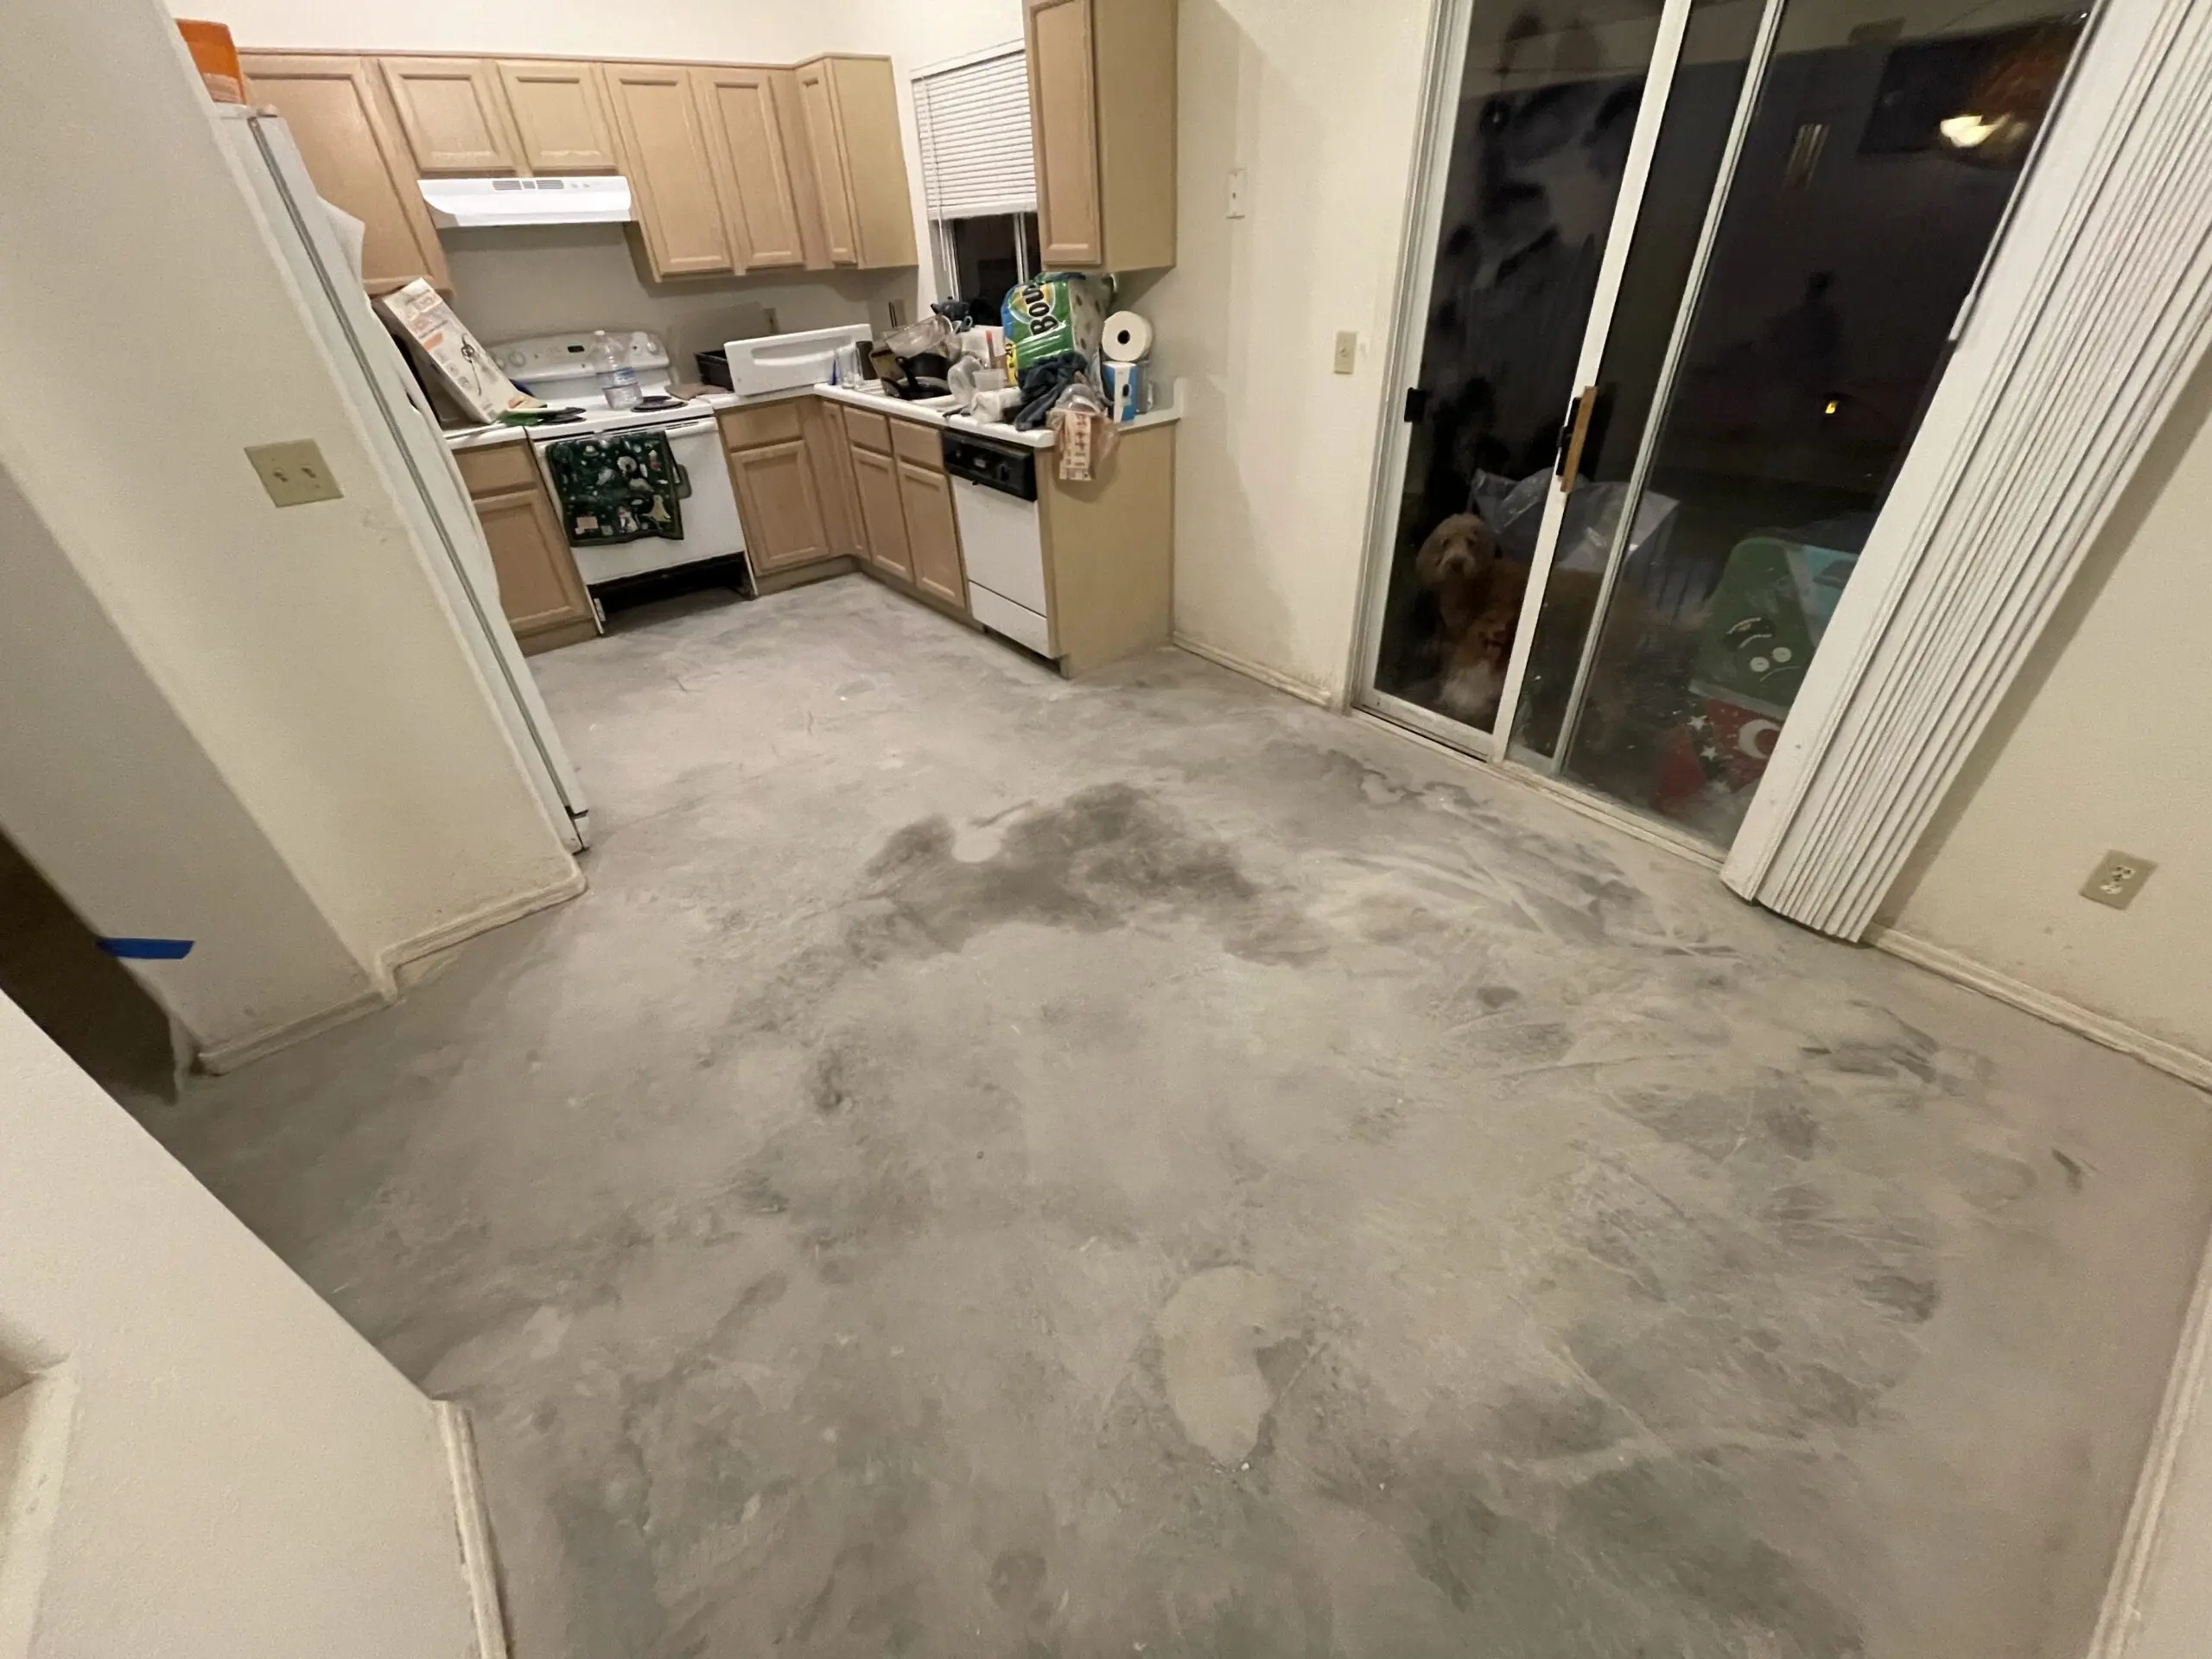 A picture showing a kitchen with bare, cleaned concrete floors after vinyl removal, showing the raw state before the acid staining process begins.